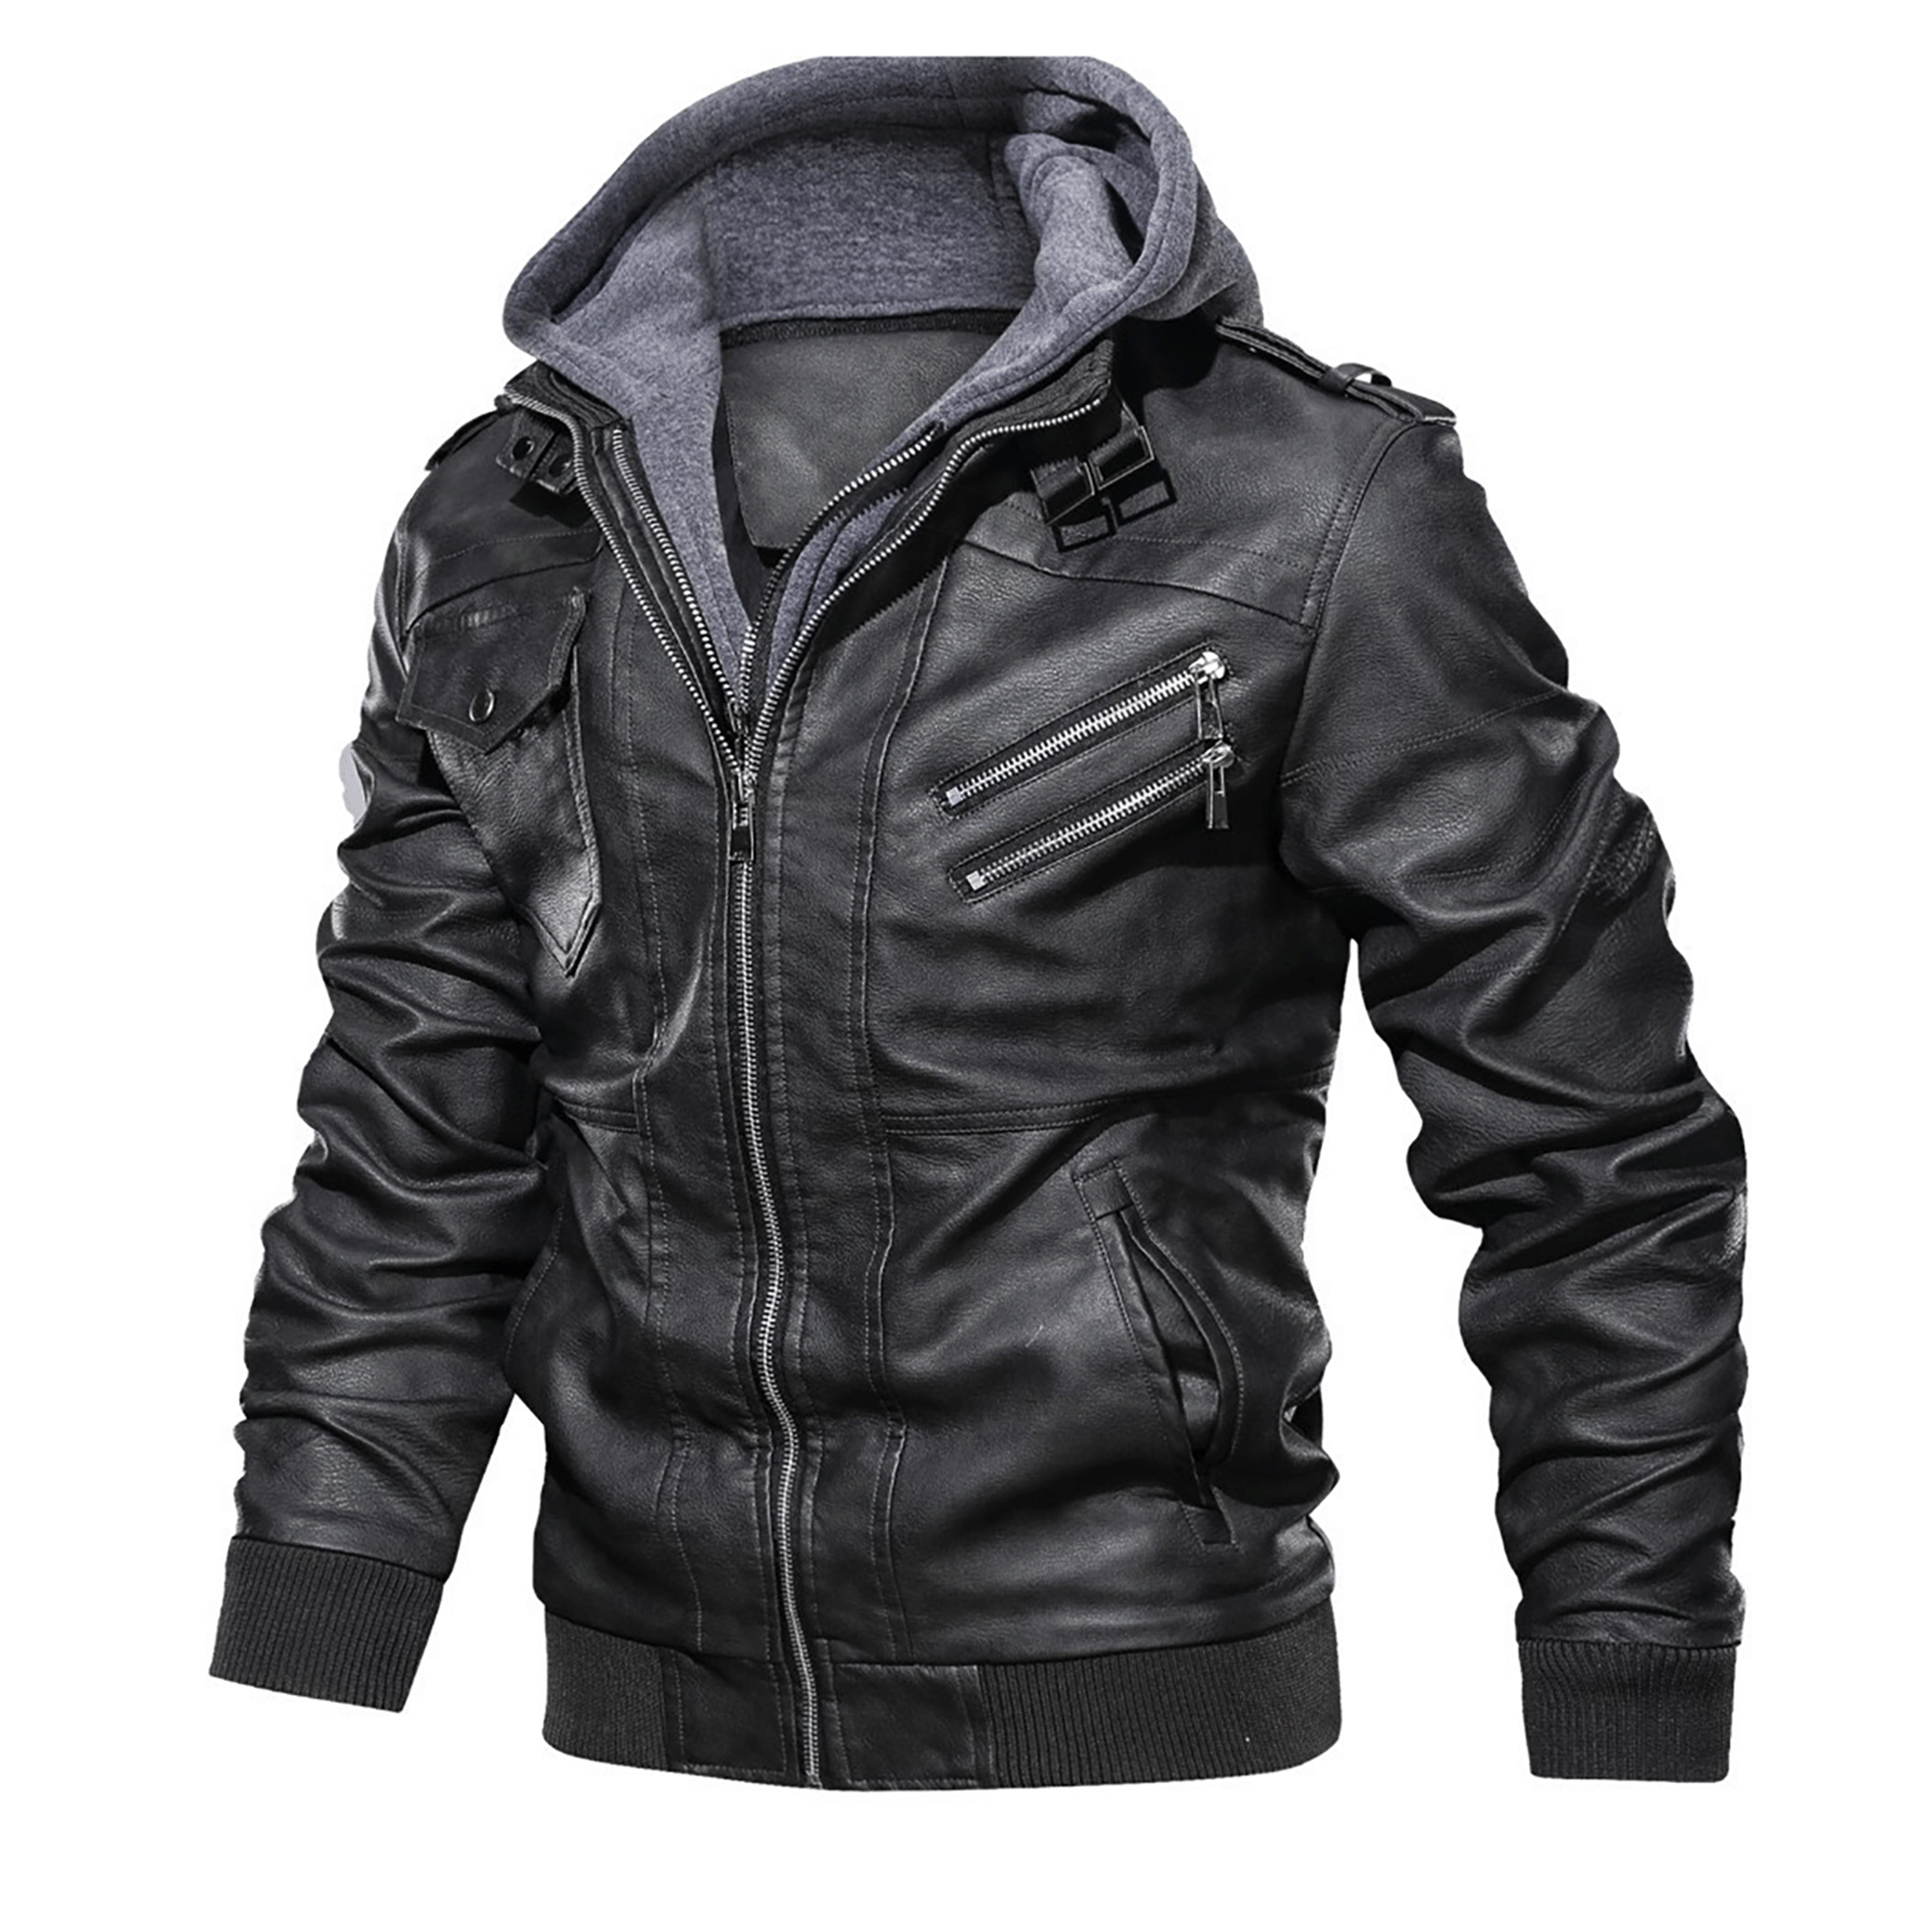 Top leather jackets and latest products 323